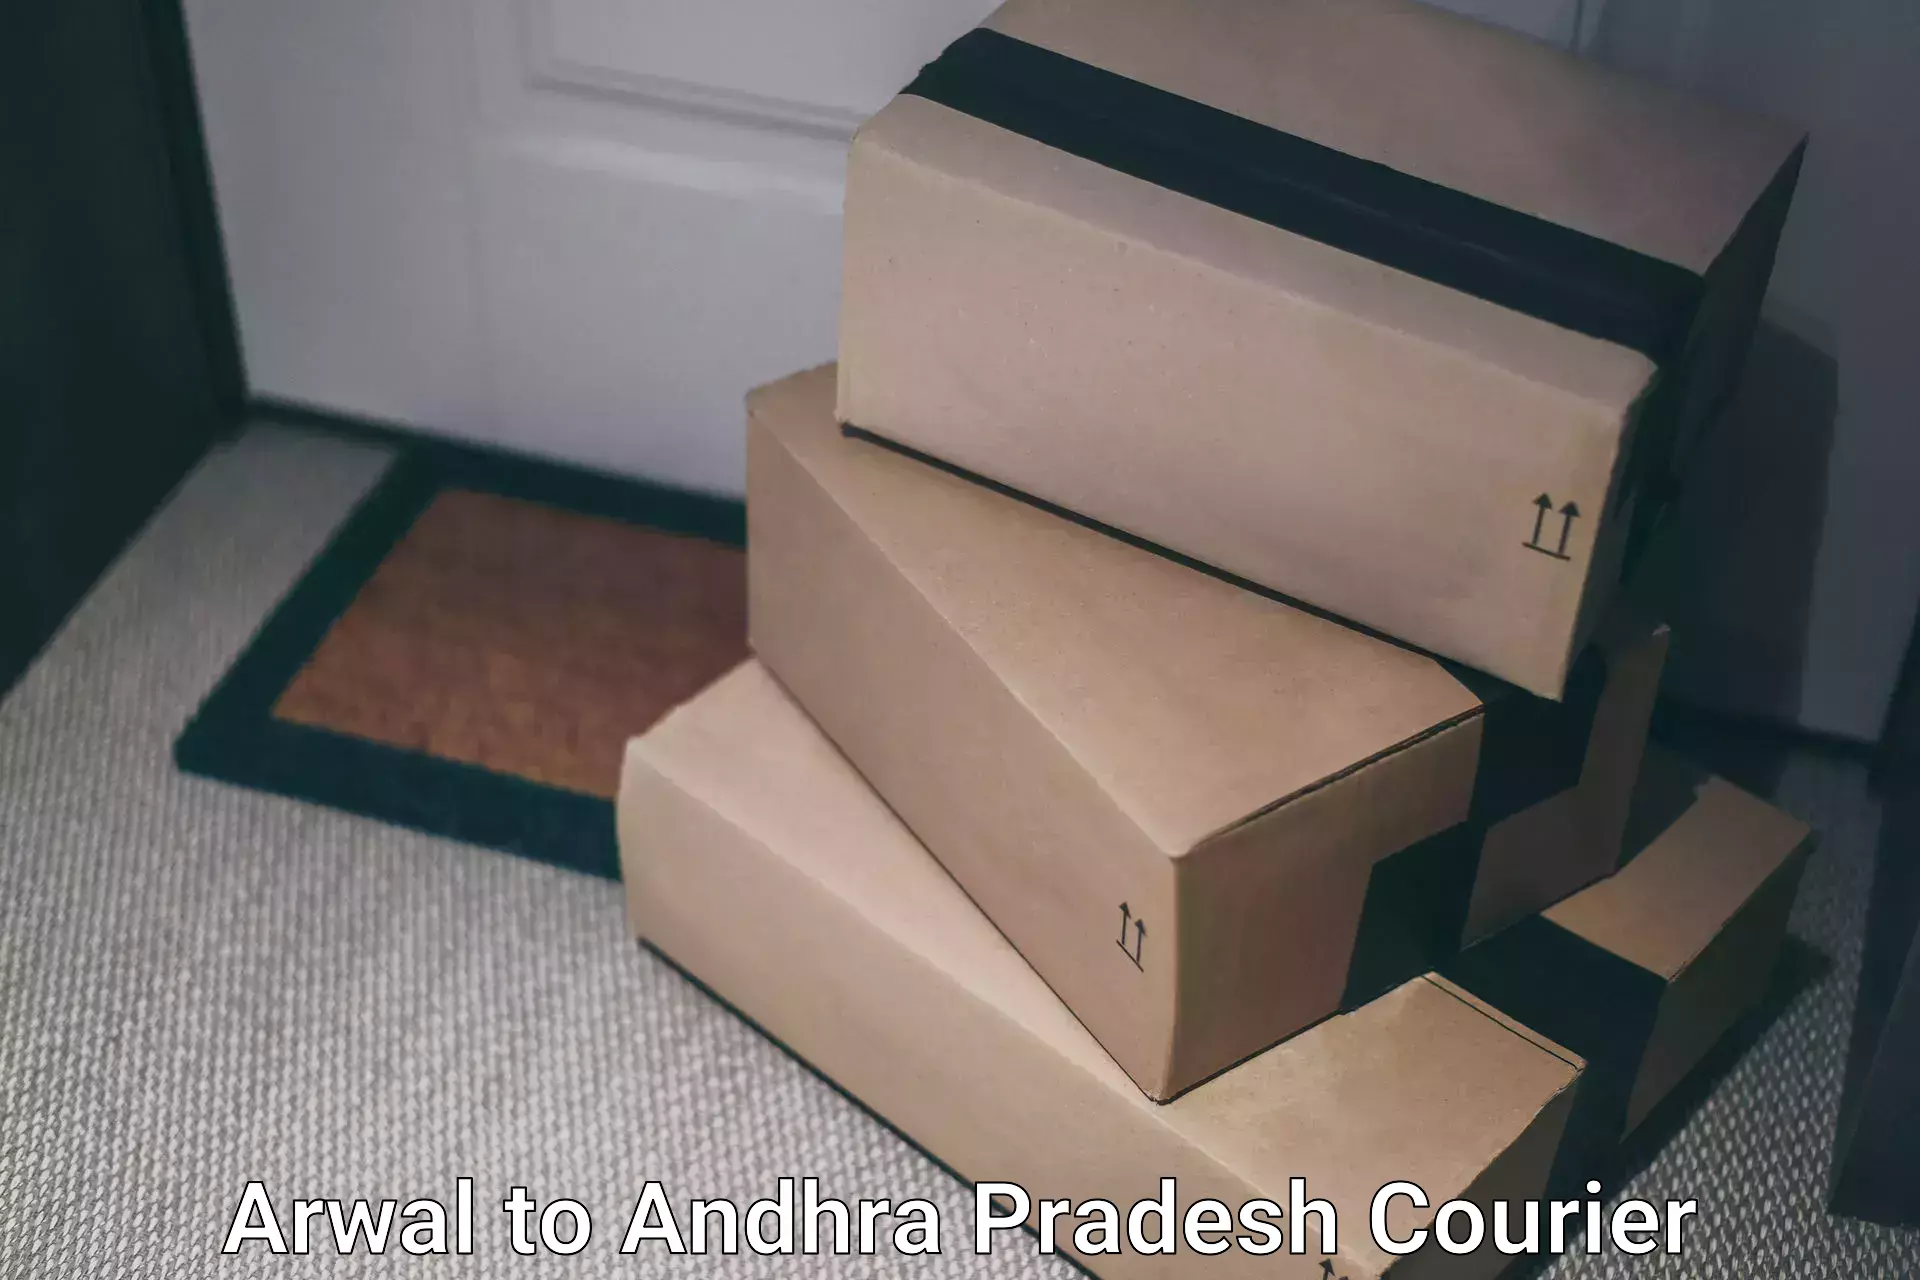 Modern delivery technologies Arwal to Andhra Pradesh